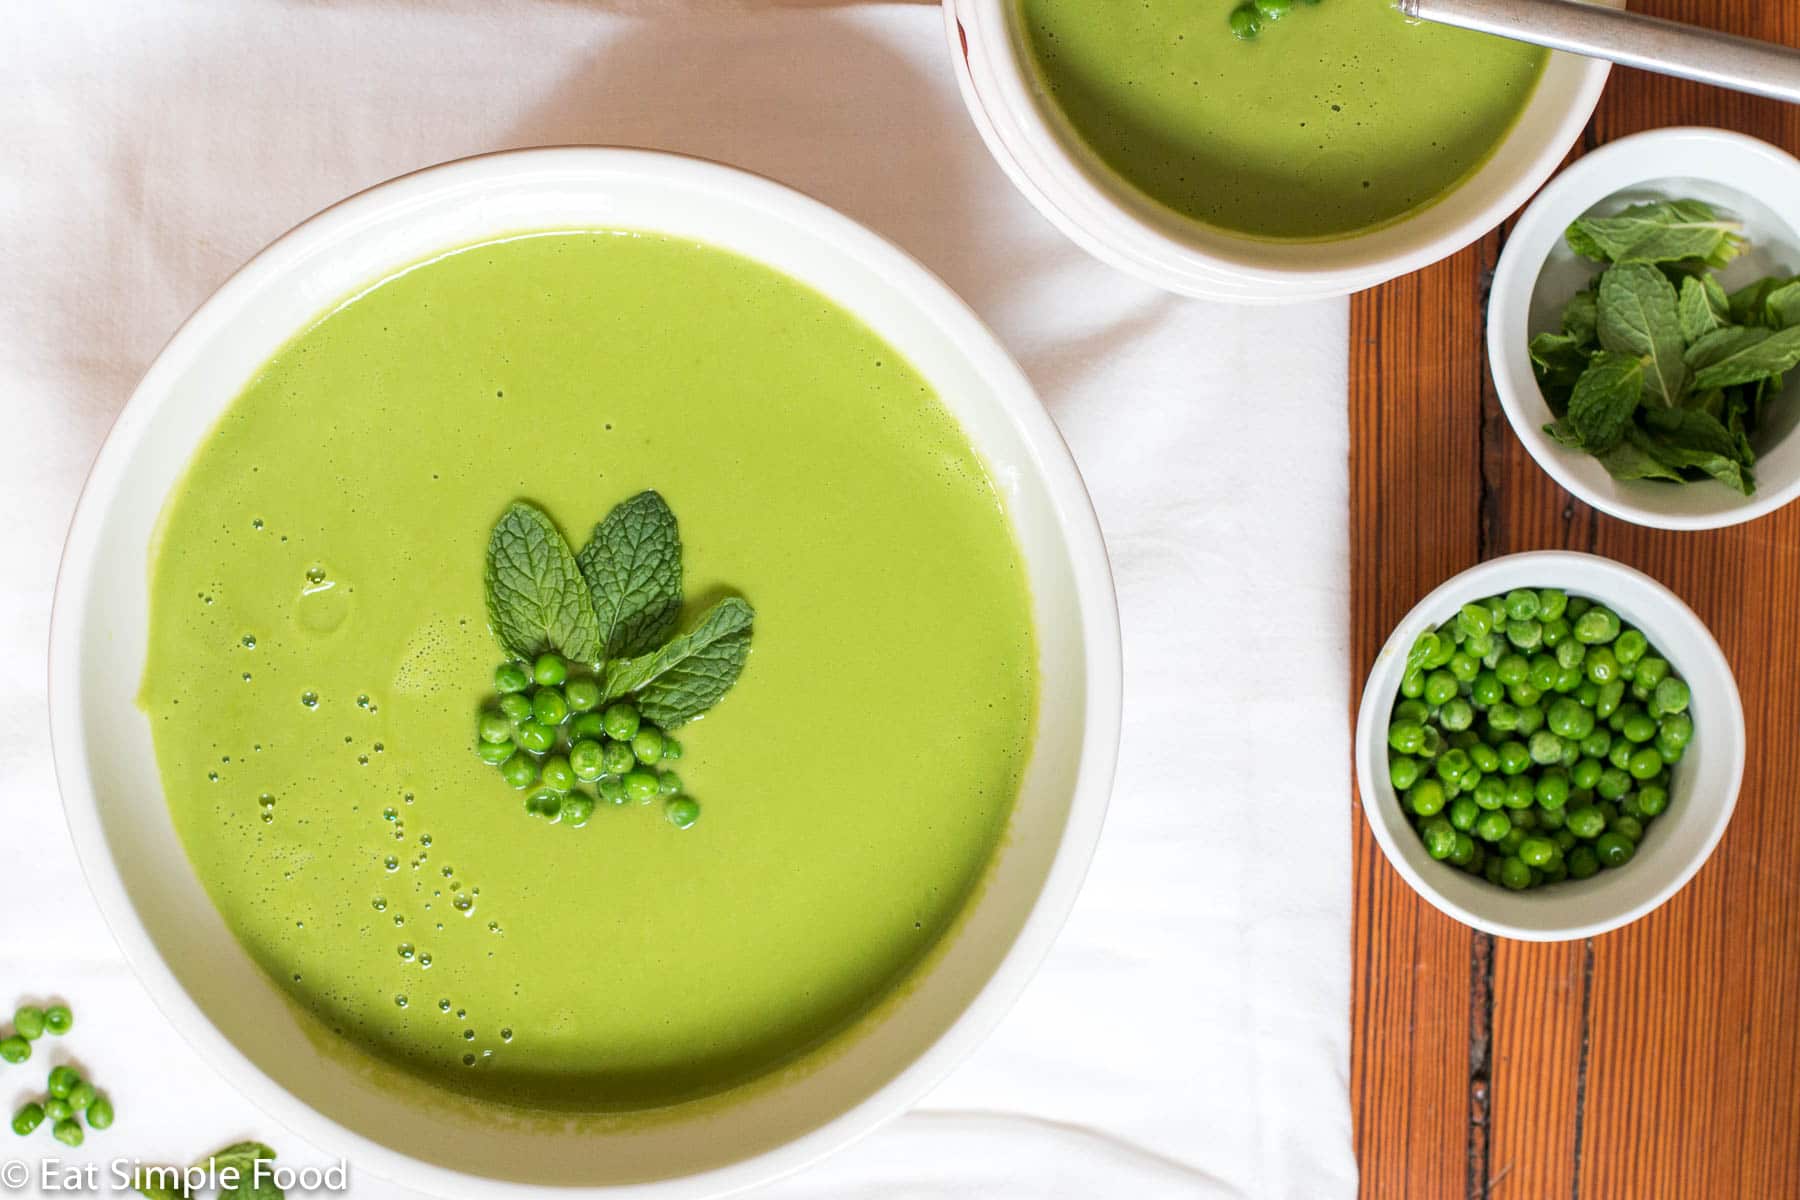 Large white bowl of green creamy soup garnished with fresh peas and mint leaves. Small bowl of peas and bowl of mint leaves. Top view.